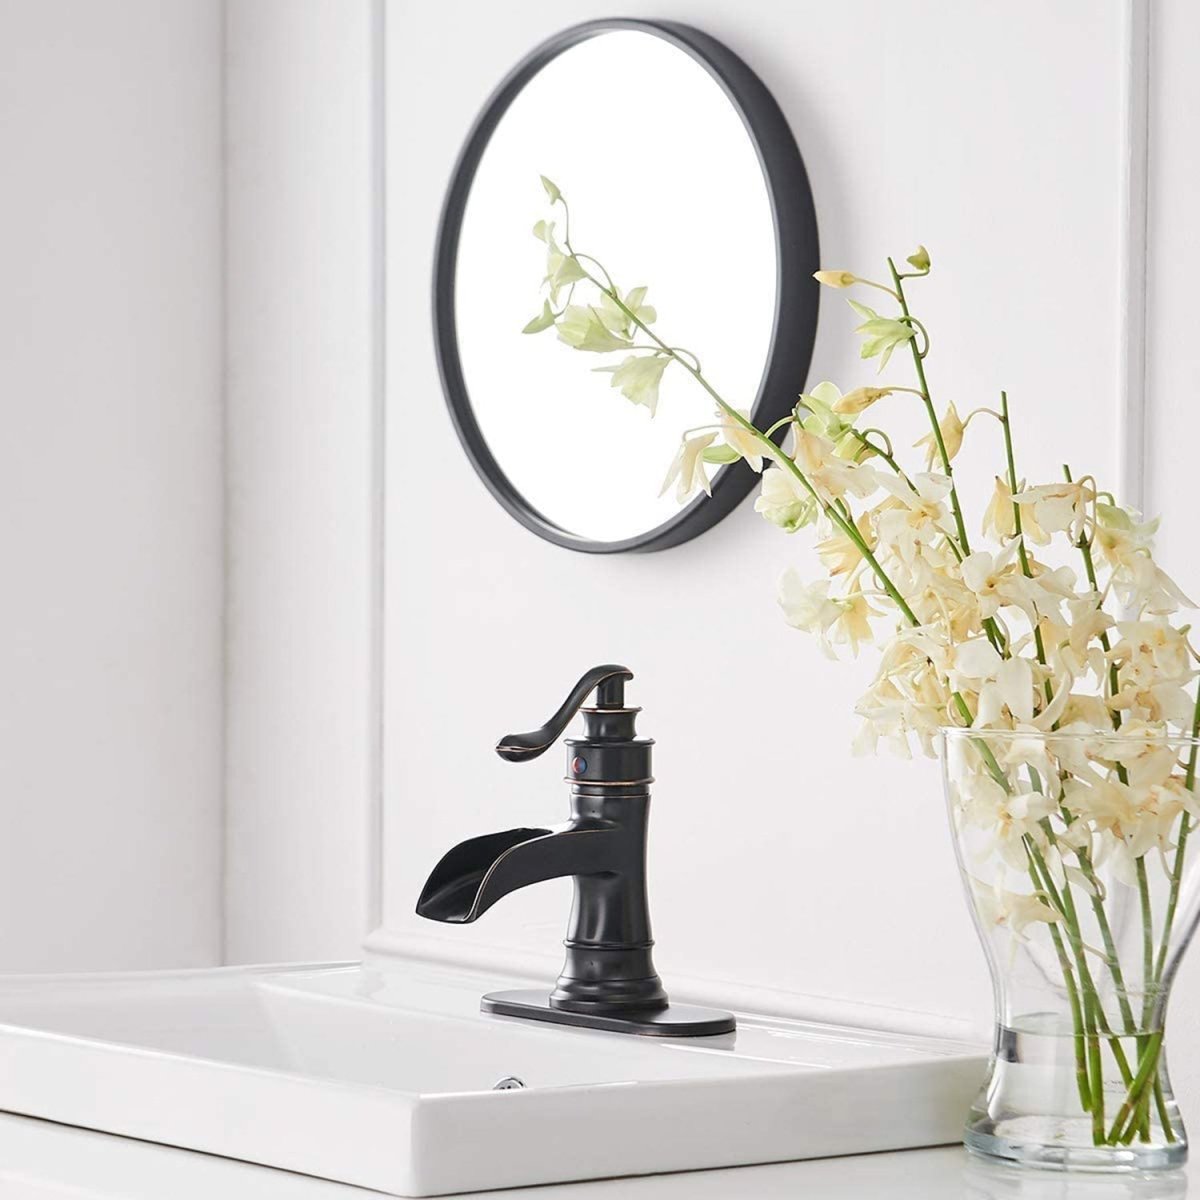 Waterfall Single Hole l Bathroom Faucet Oil Rubbed Bronze-1 - buyfaucet.com